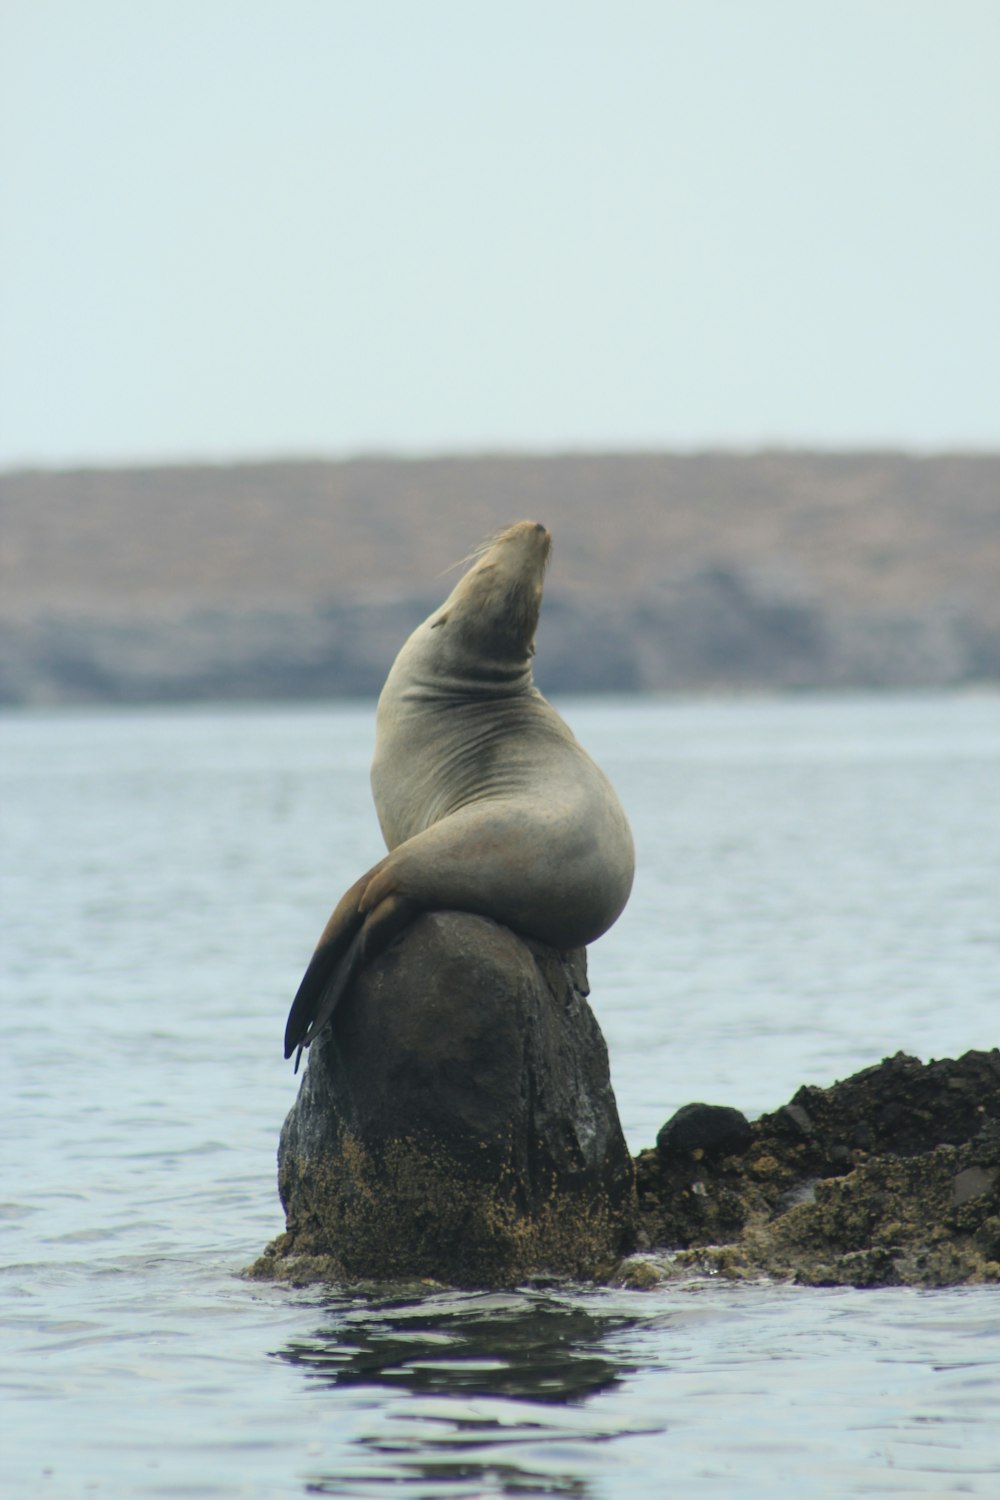 sea lion on rock near body of water during daytime